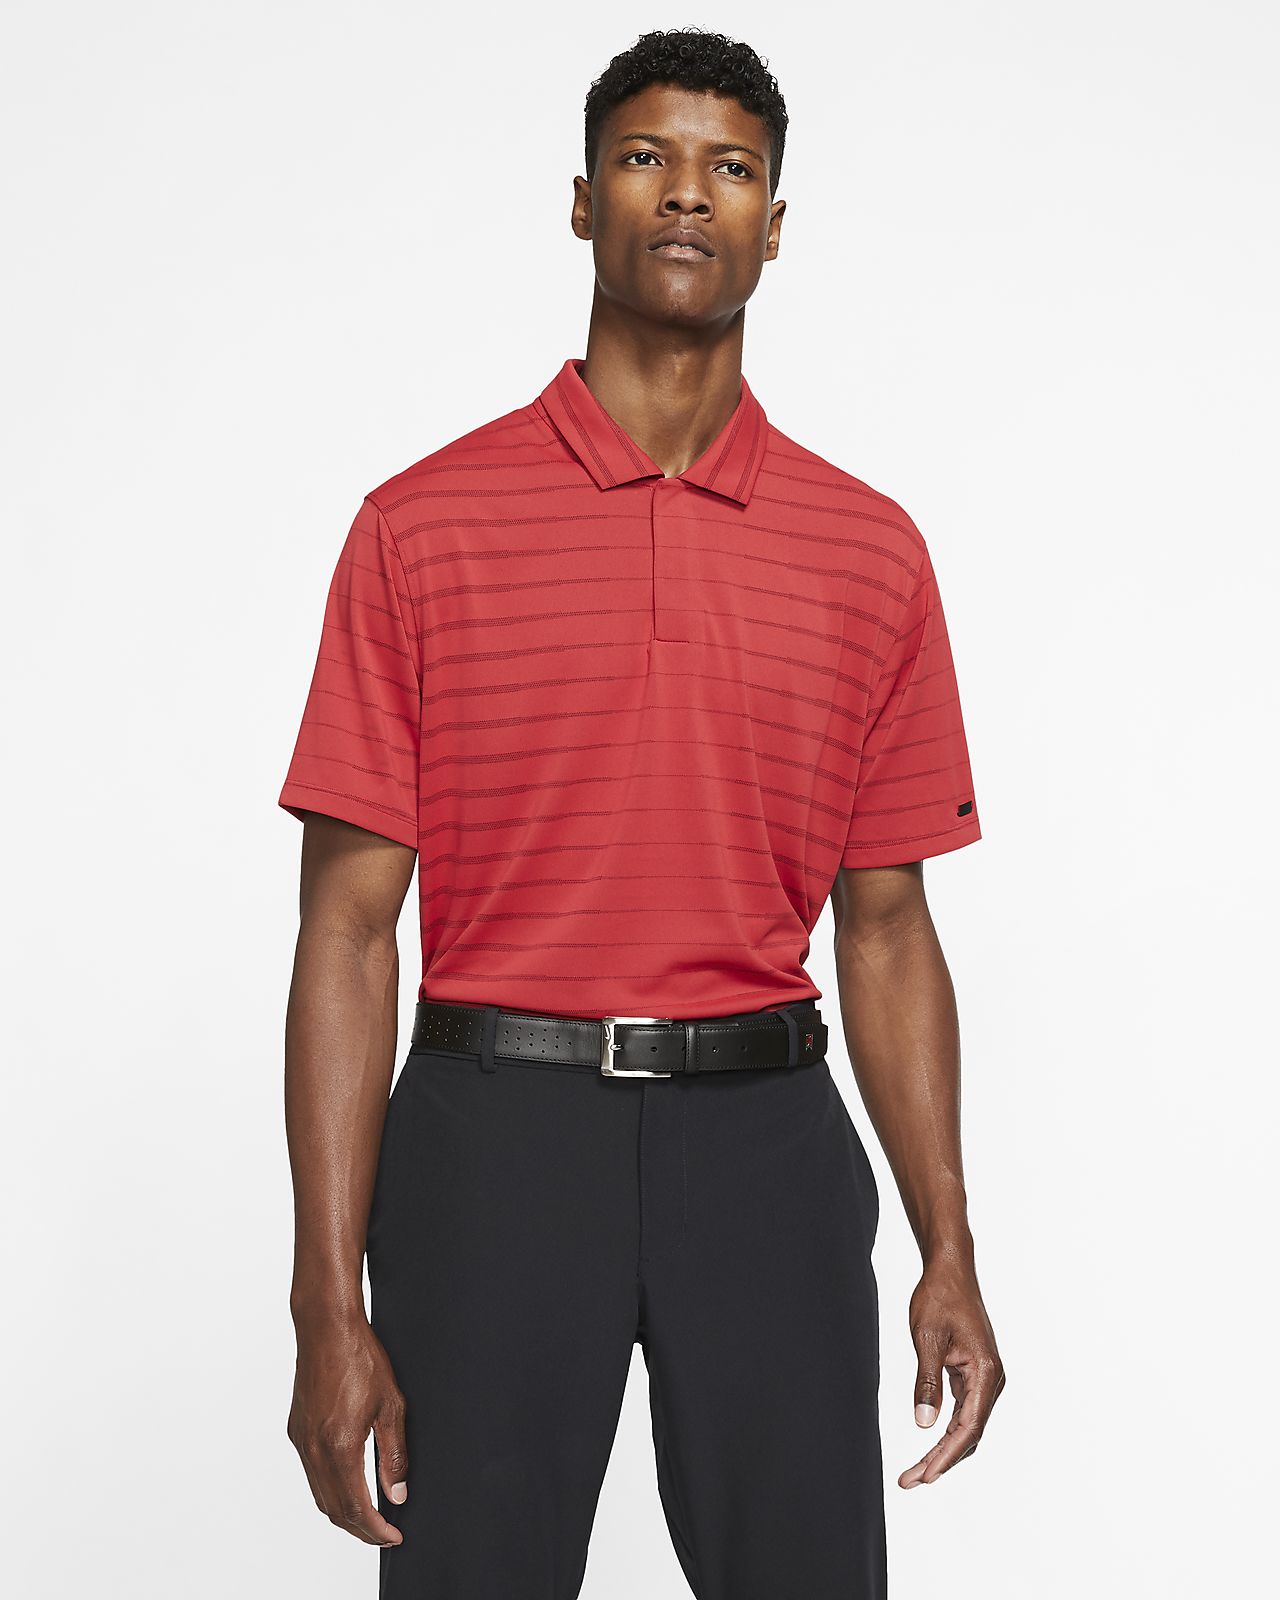 tiger woods red nike